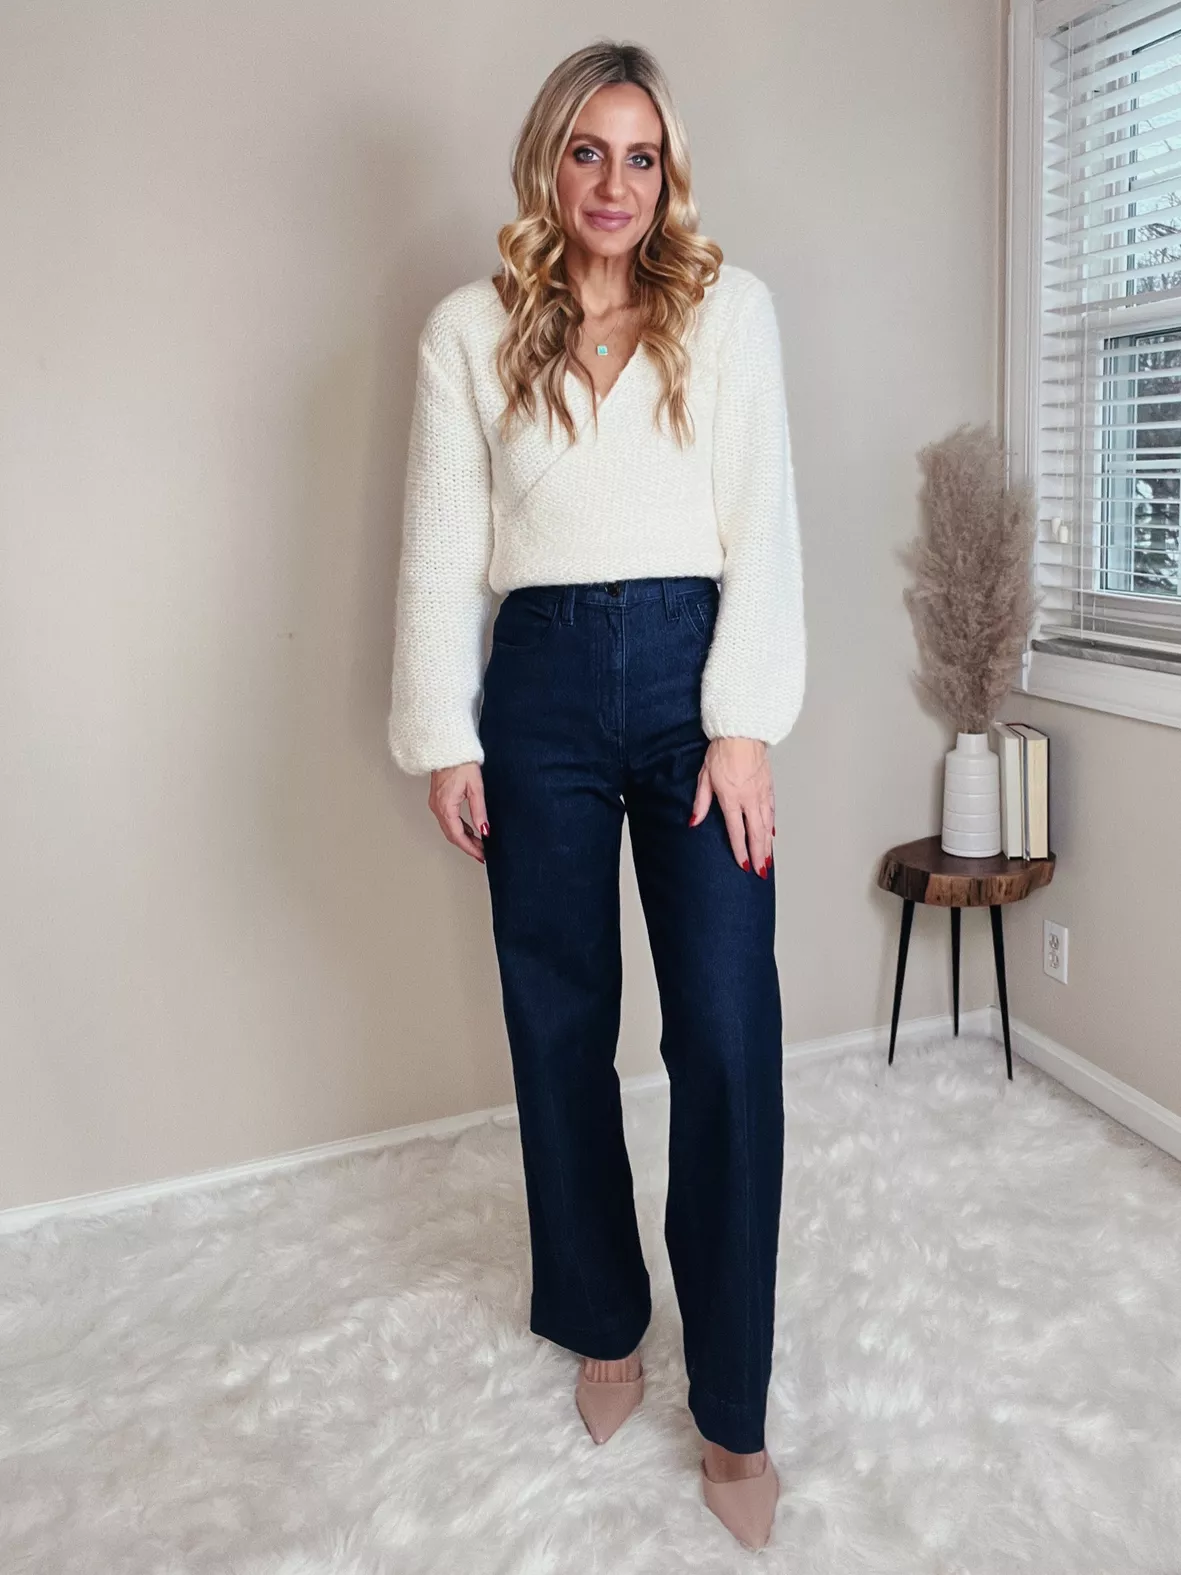 How To Style Wide Leg Jeans + Haul 